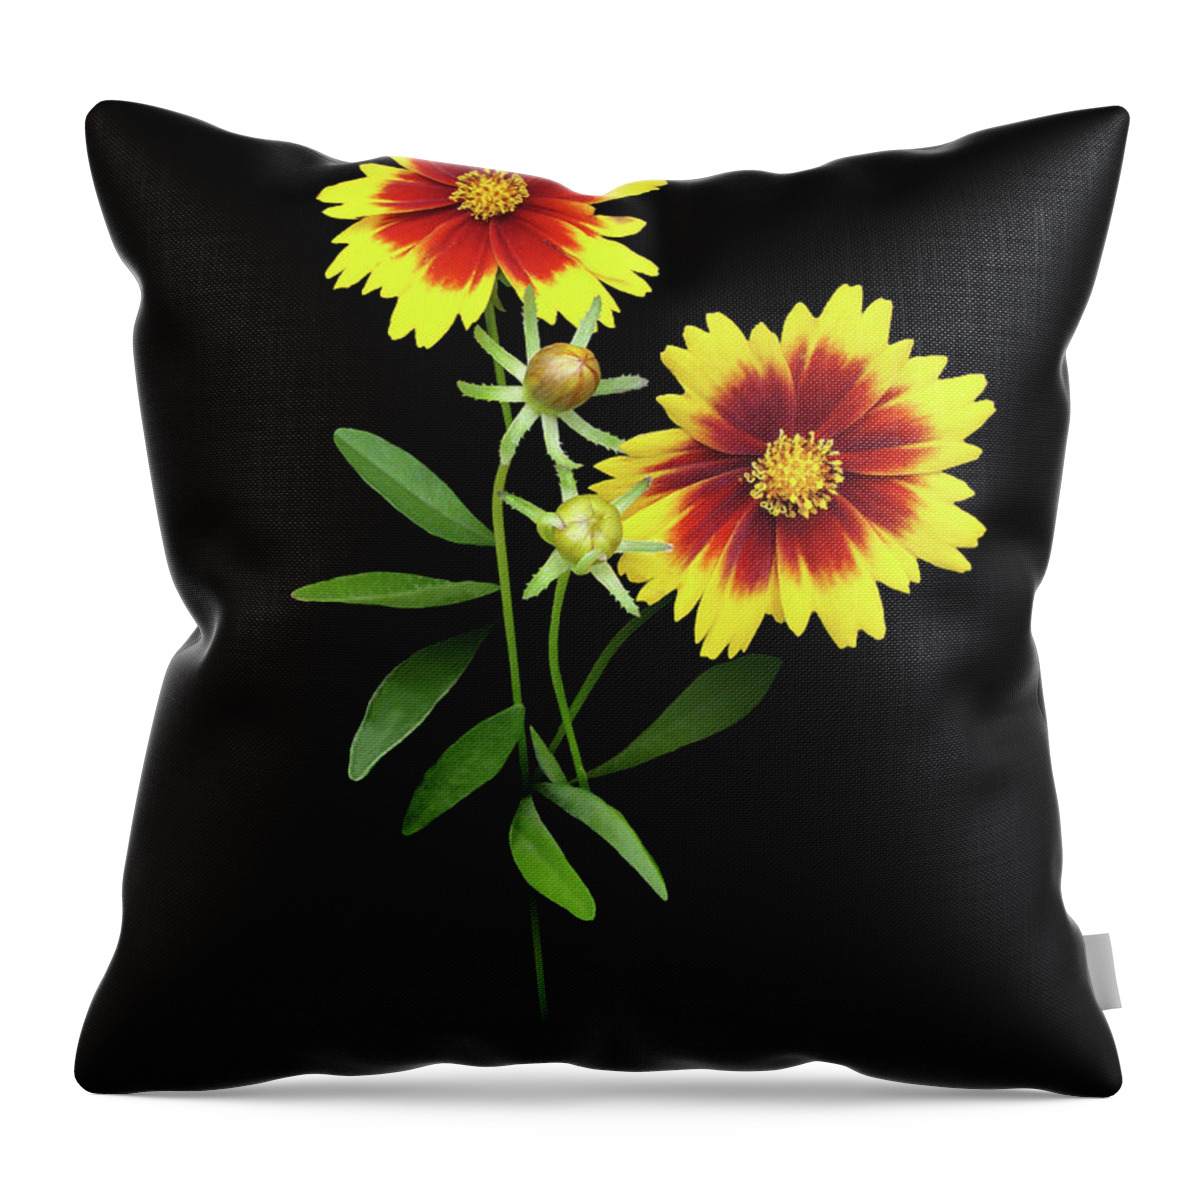 Wildflower Throw Pillow featuring the digital art Florida Wildflowers by M Spadecaller